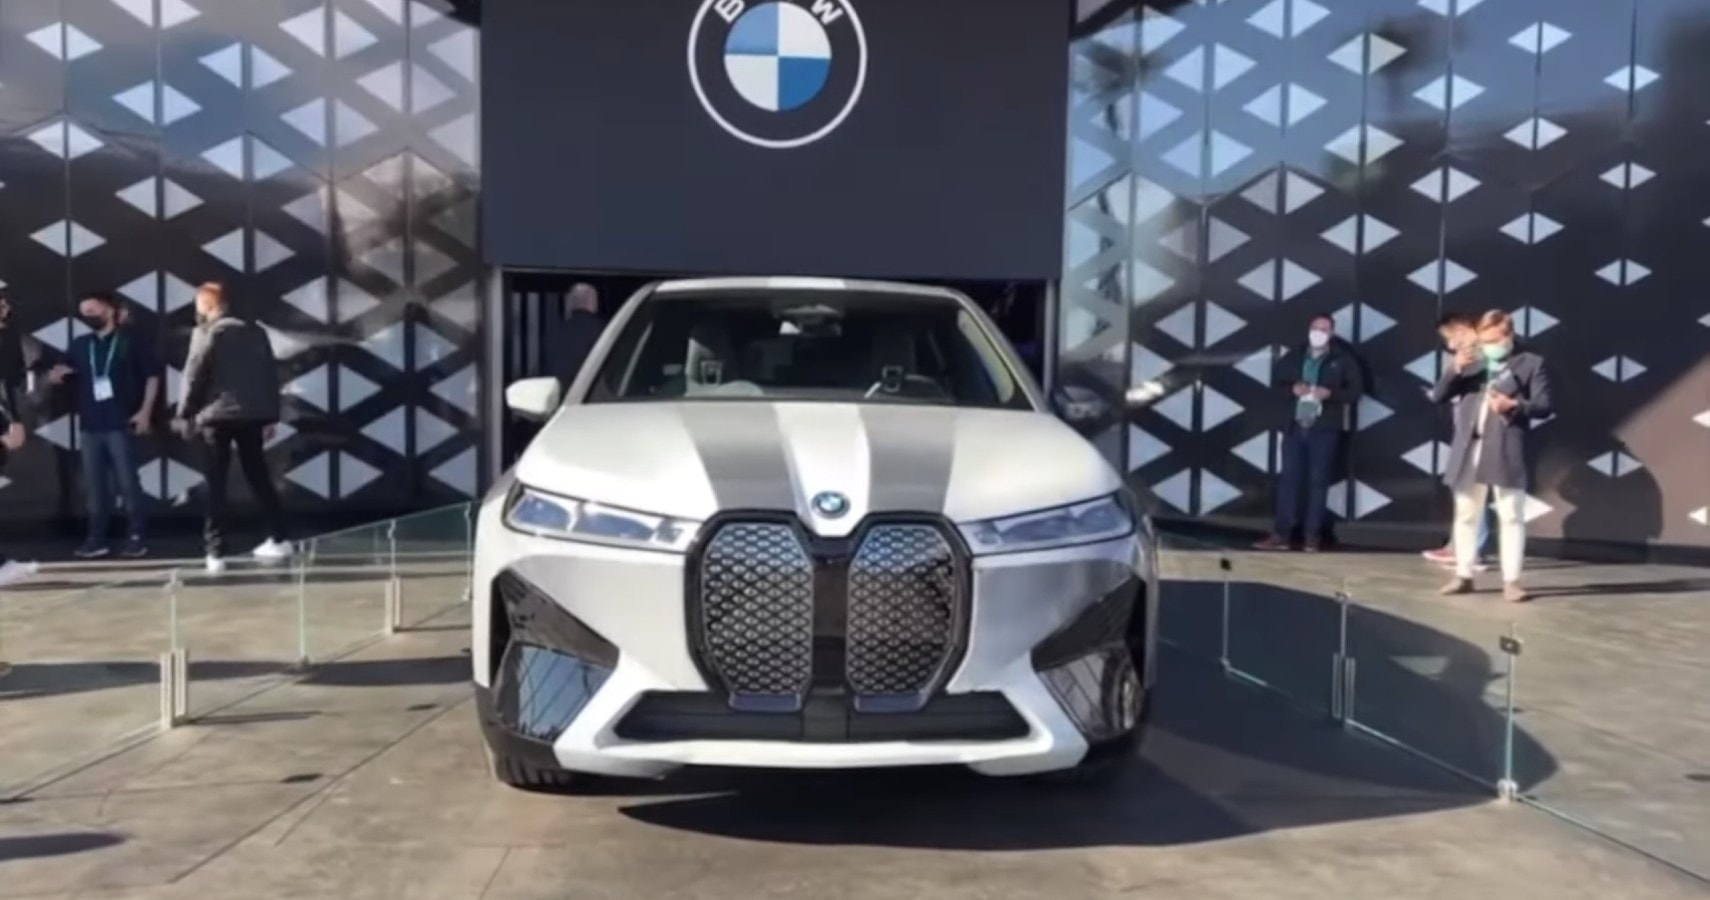 BMW Unveils Chameleon-Like Color-Changing IX Flow SUV at CES That Uses  E-Reader Technology - autoevolution